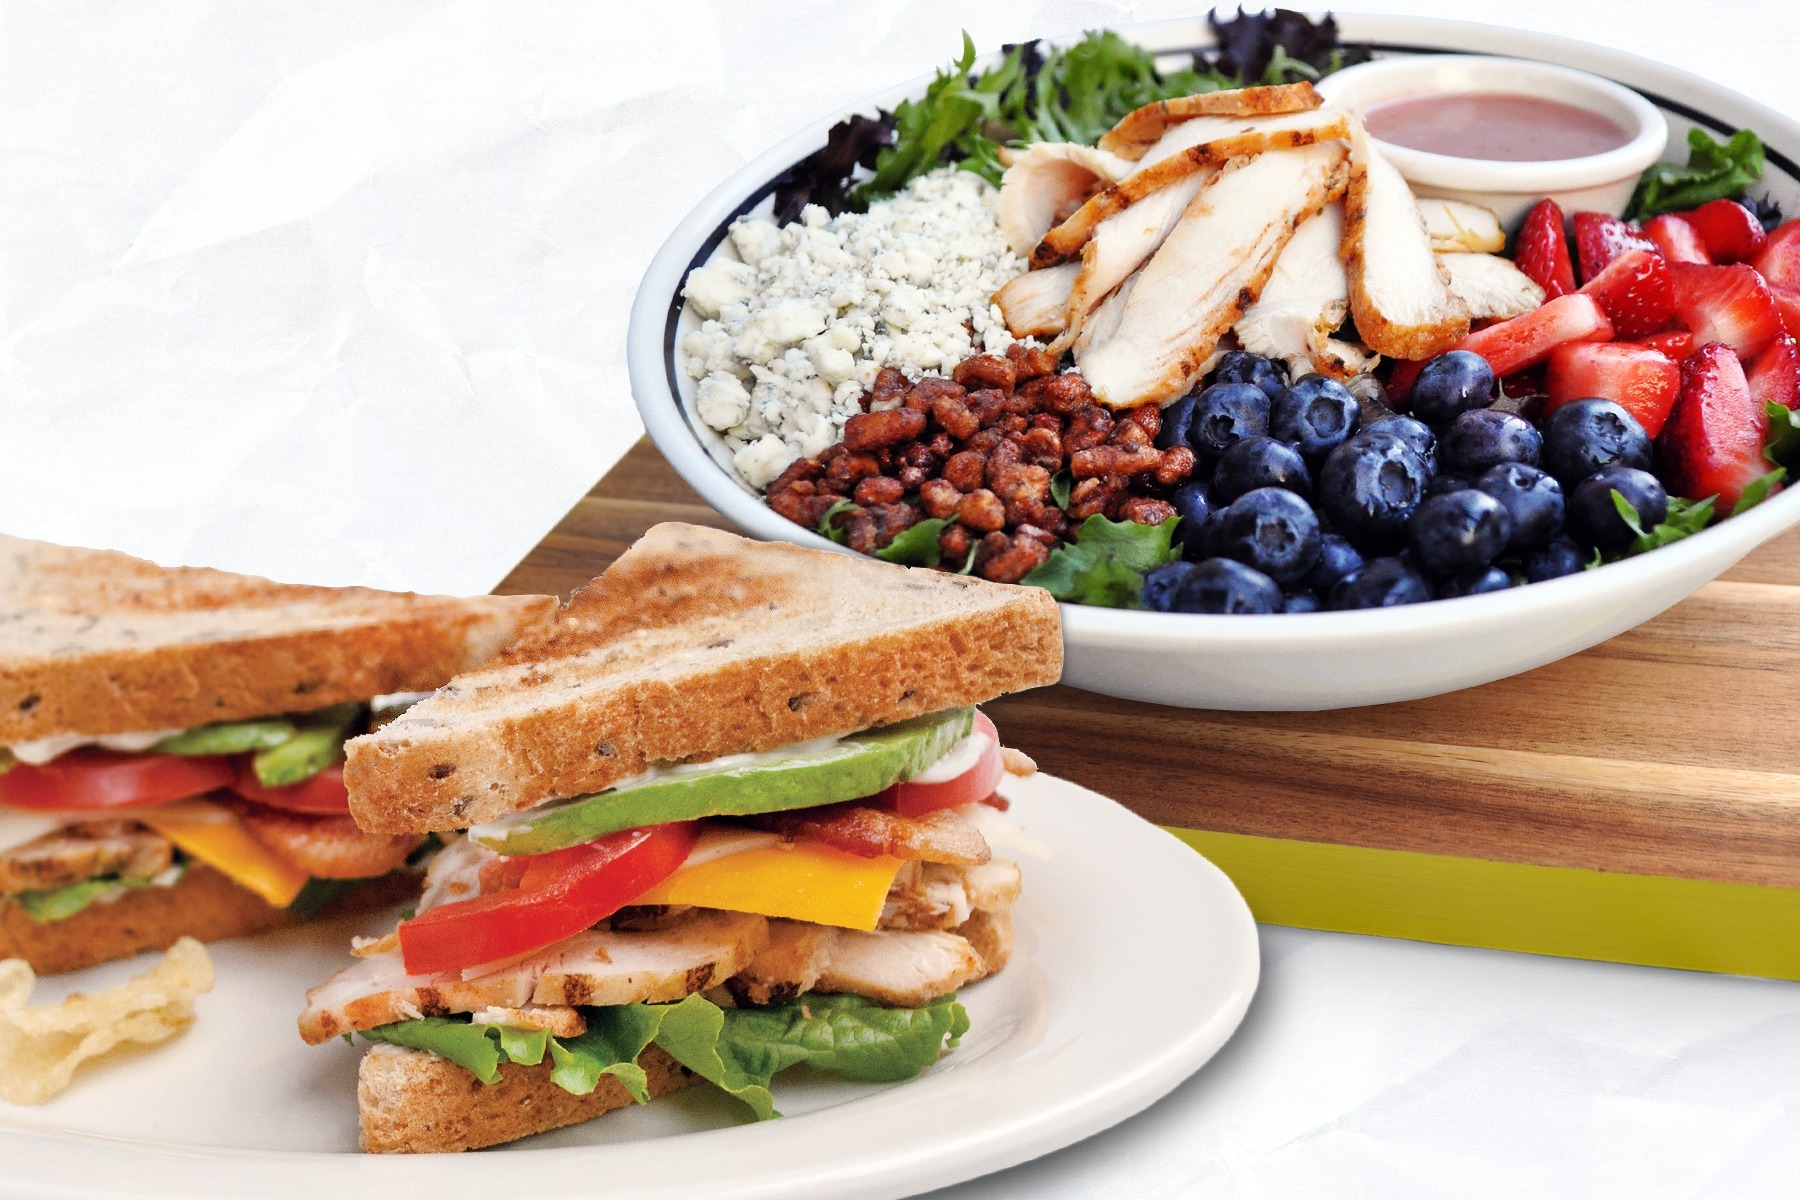 Fresh Flavors Flourish At Corner Bakery Cafe This Summer Business Wire